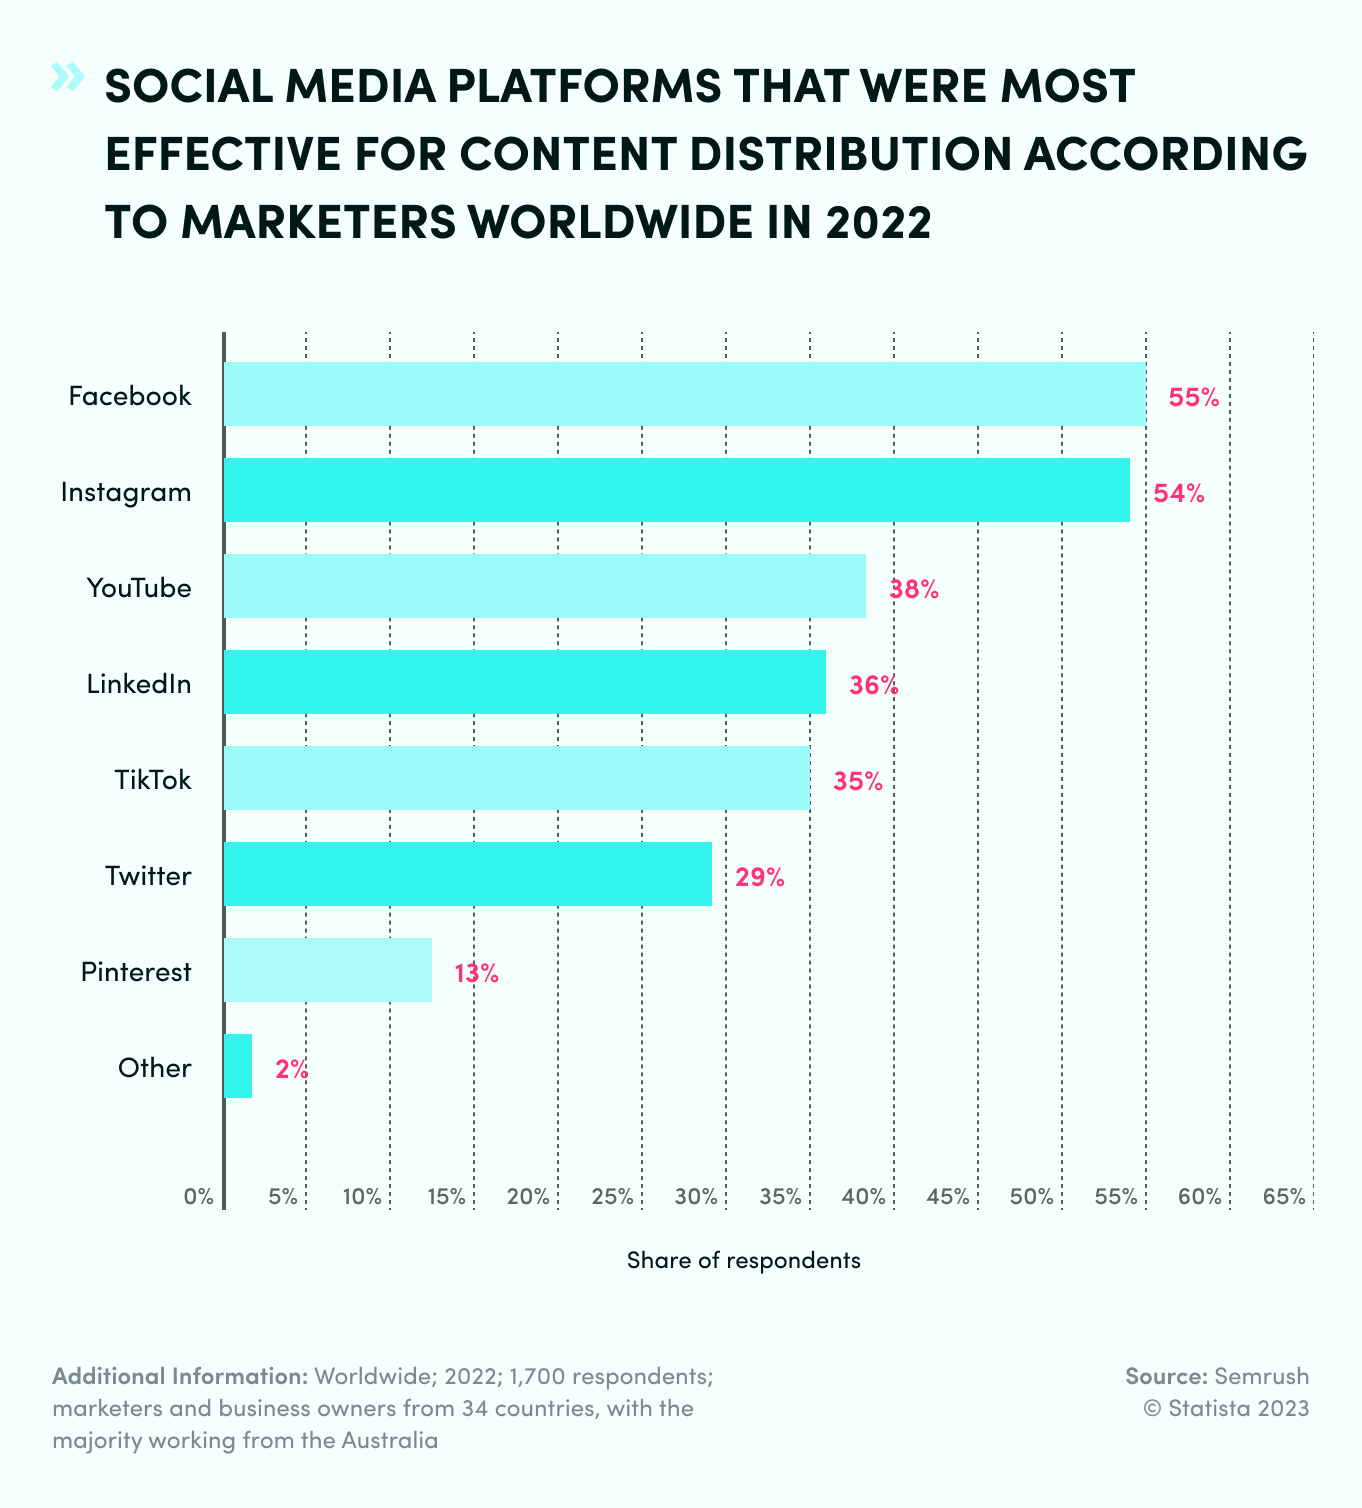 How Effective For TikTok Content According To Marketers Worldwide